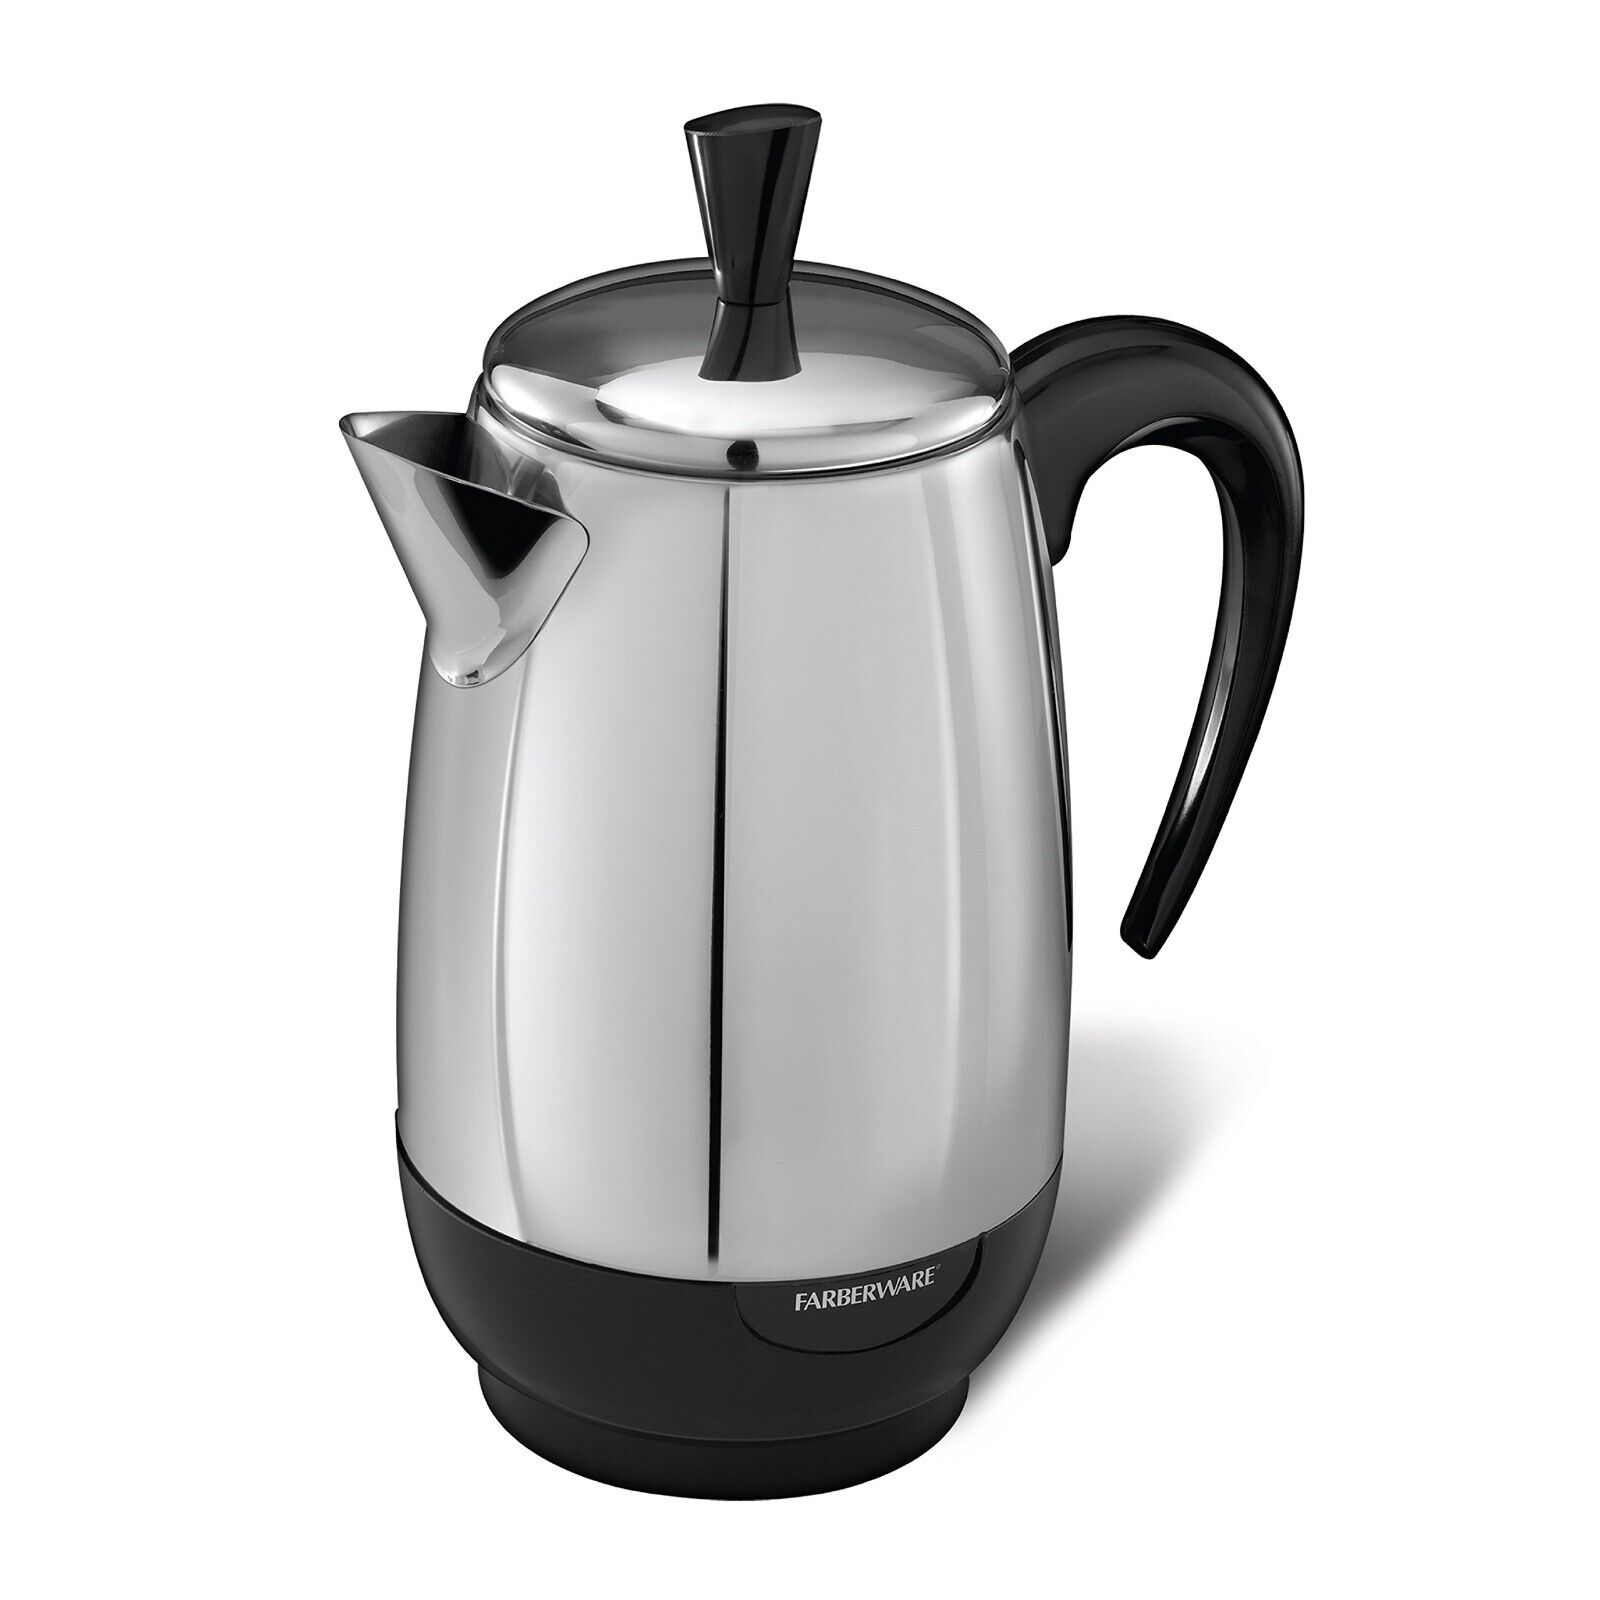 Farberware Electric Coffee Percolator, FCP280, Stainless Steel Basket, Automatic